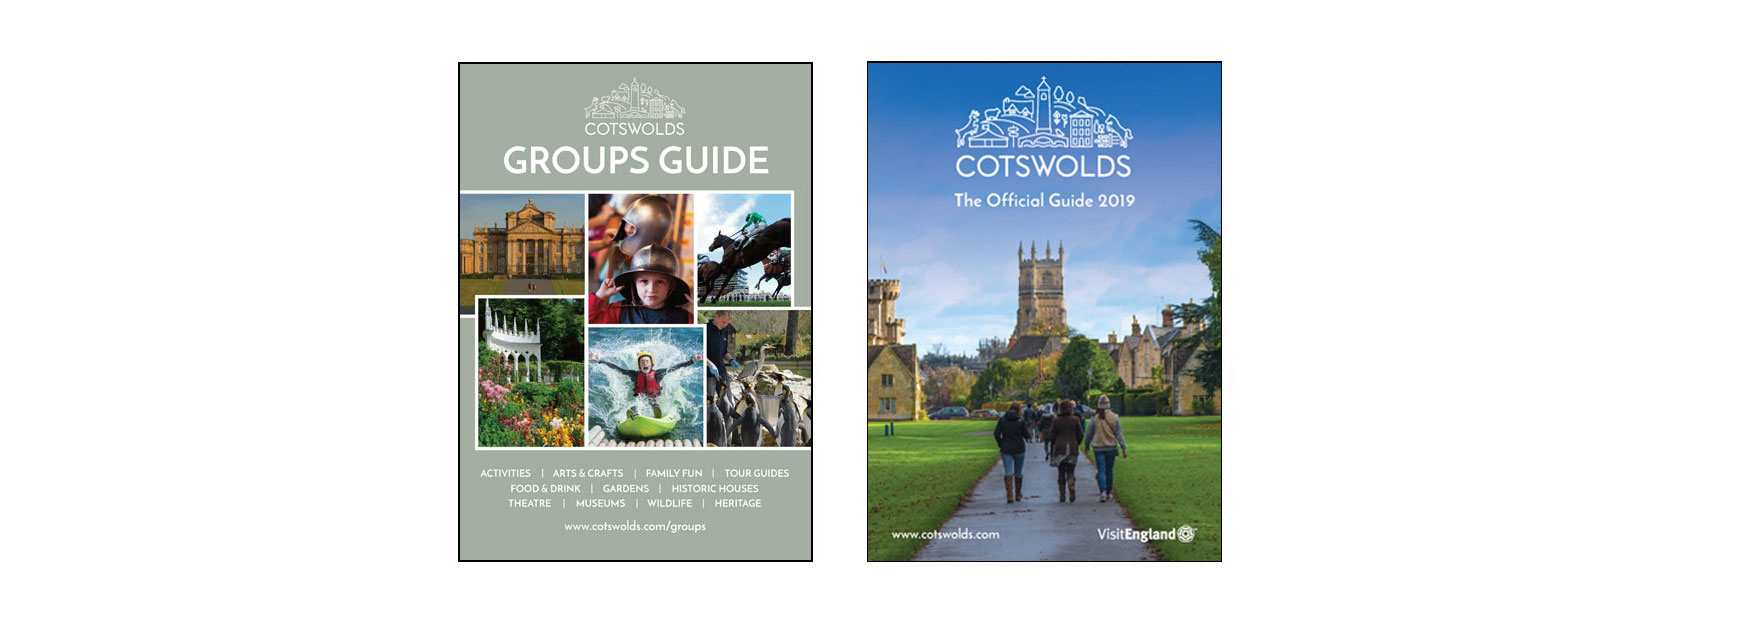 Marketing and advertising opportunities with Cotswolds Tourism